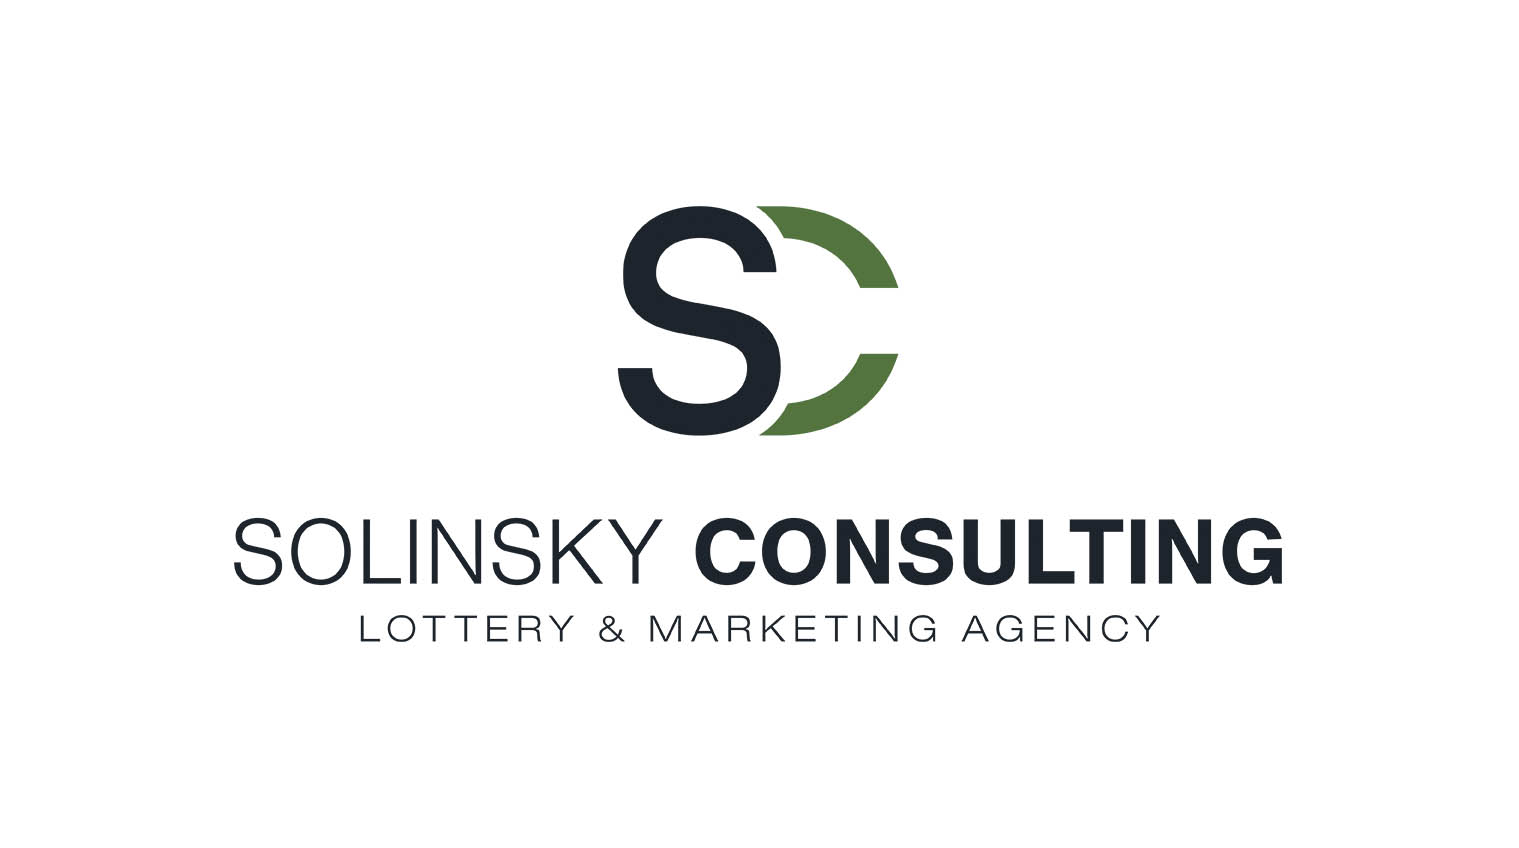 Solinsky Consulting logo design on a white background - White Canvas Design